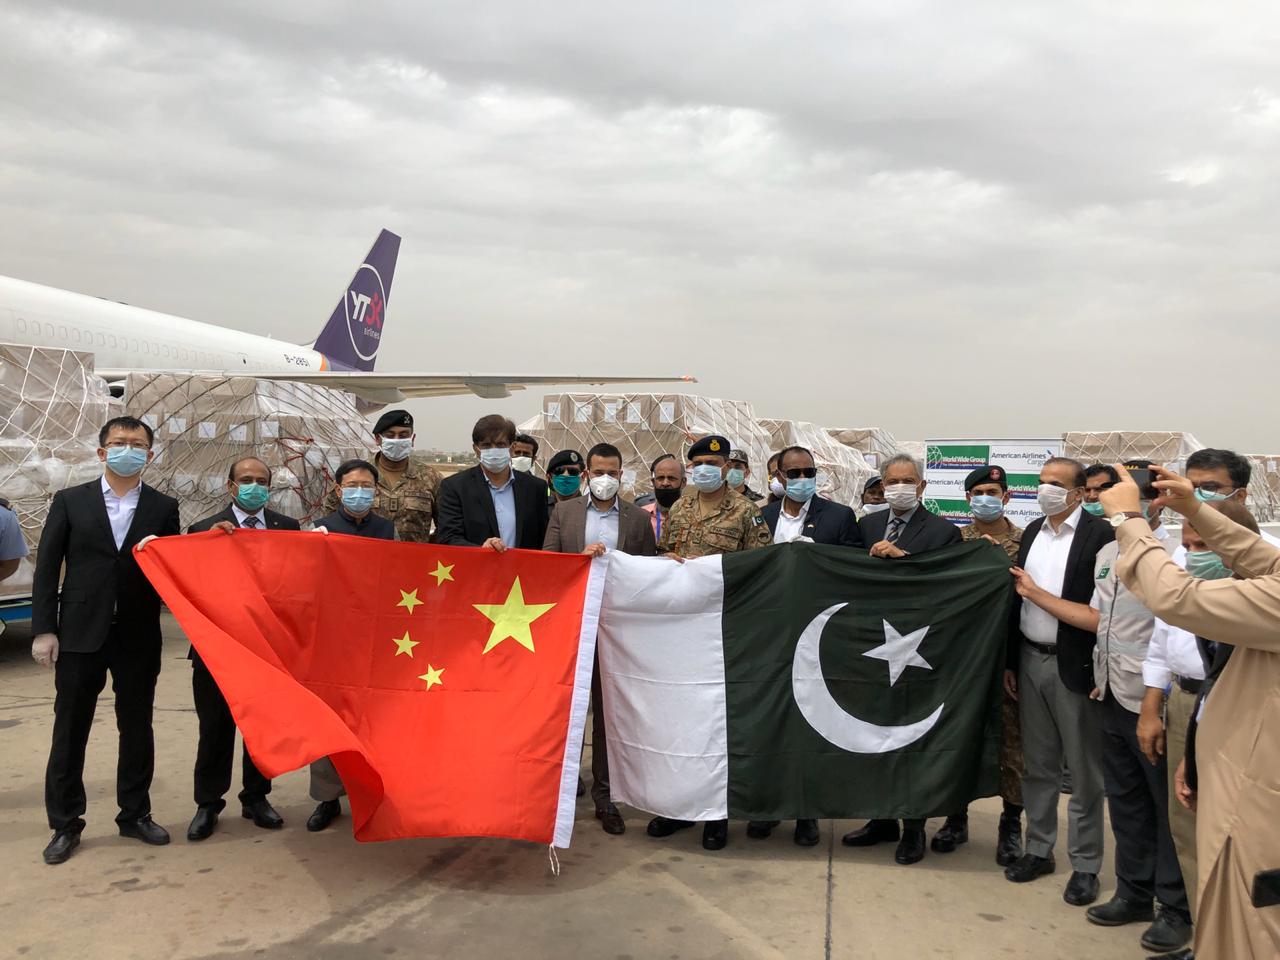 Jack Ma Foundation and Alibaba Foundation Donation Arrives in Karachi to Help Fight Against COVID-19